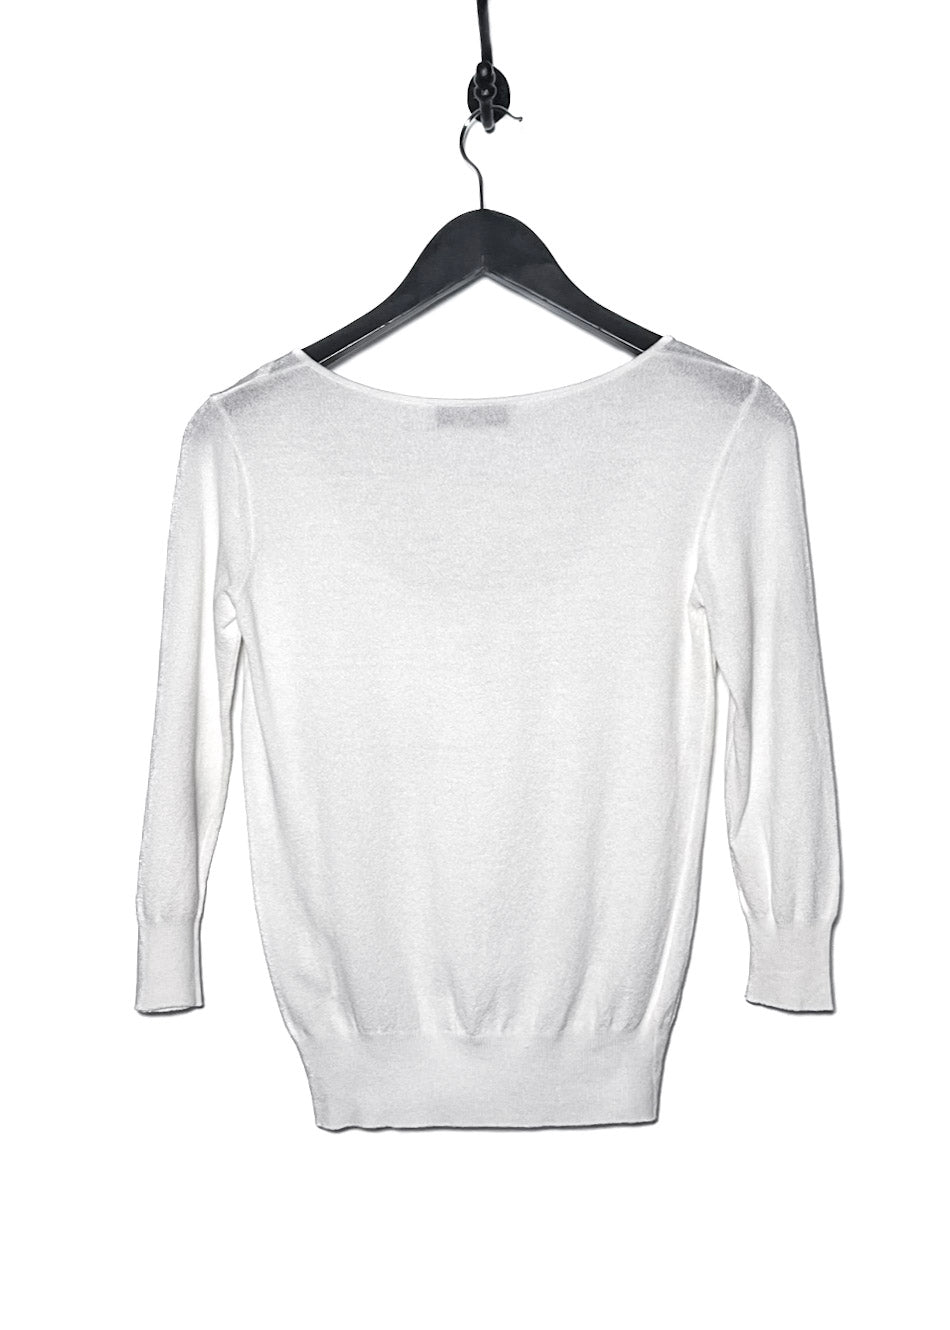 Dolce & Gabbana White Knit with Lacing Detail